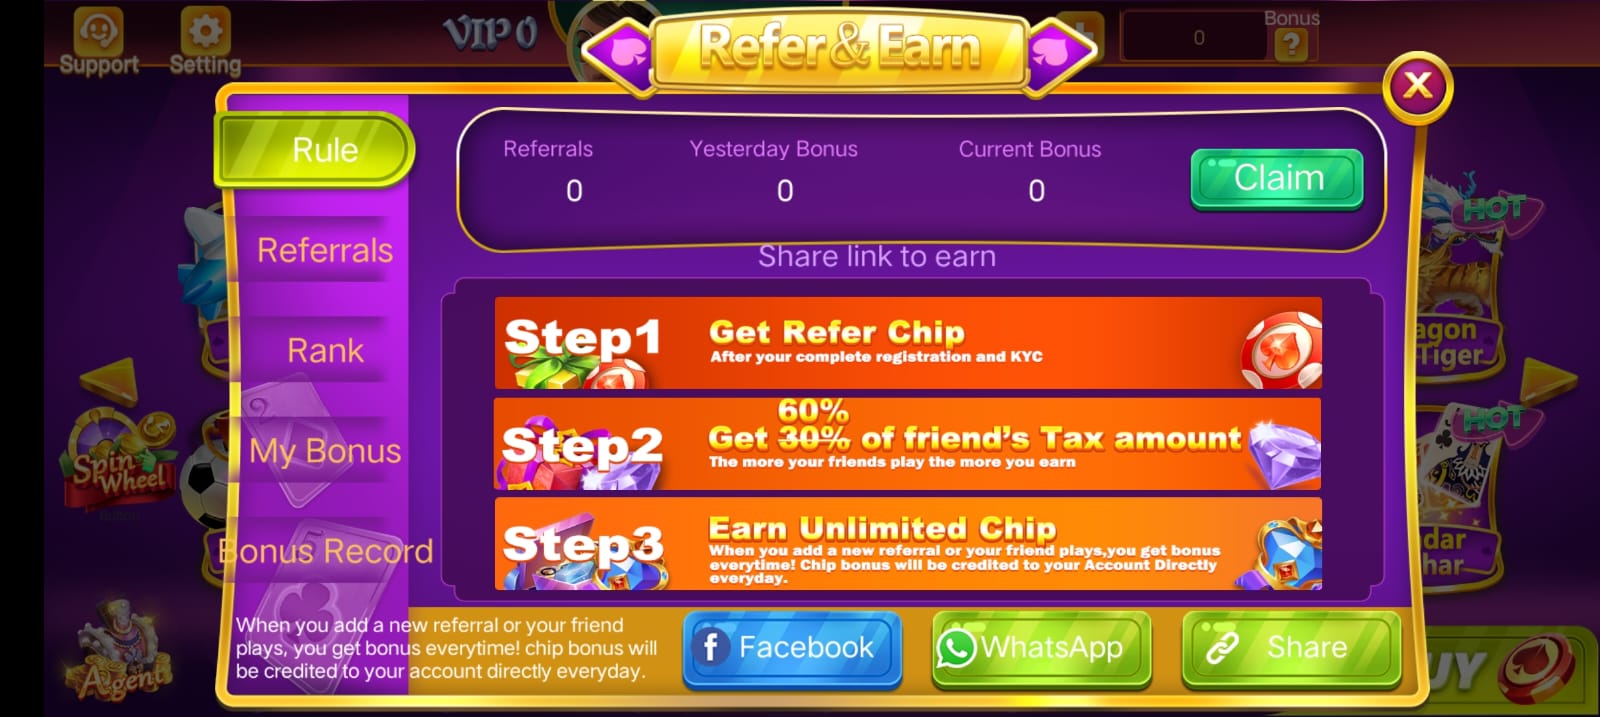 REFER AND EARN IN TEEN PATTI ONLINE APP